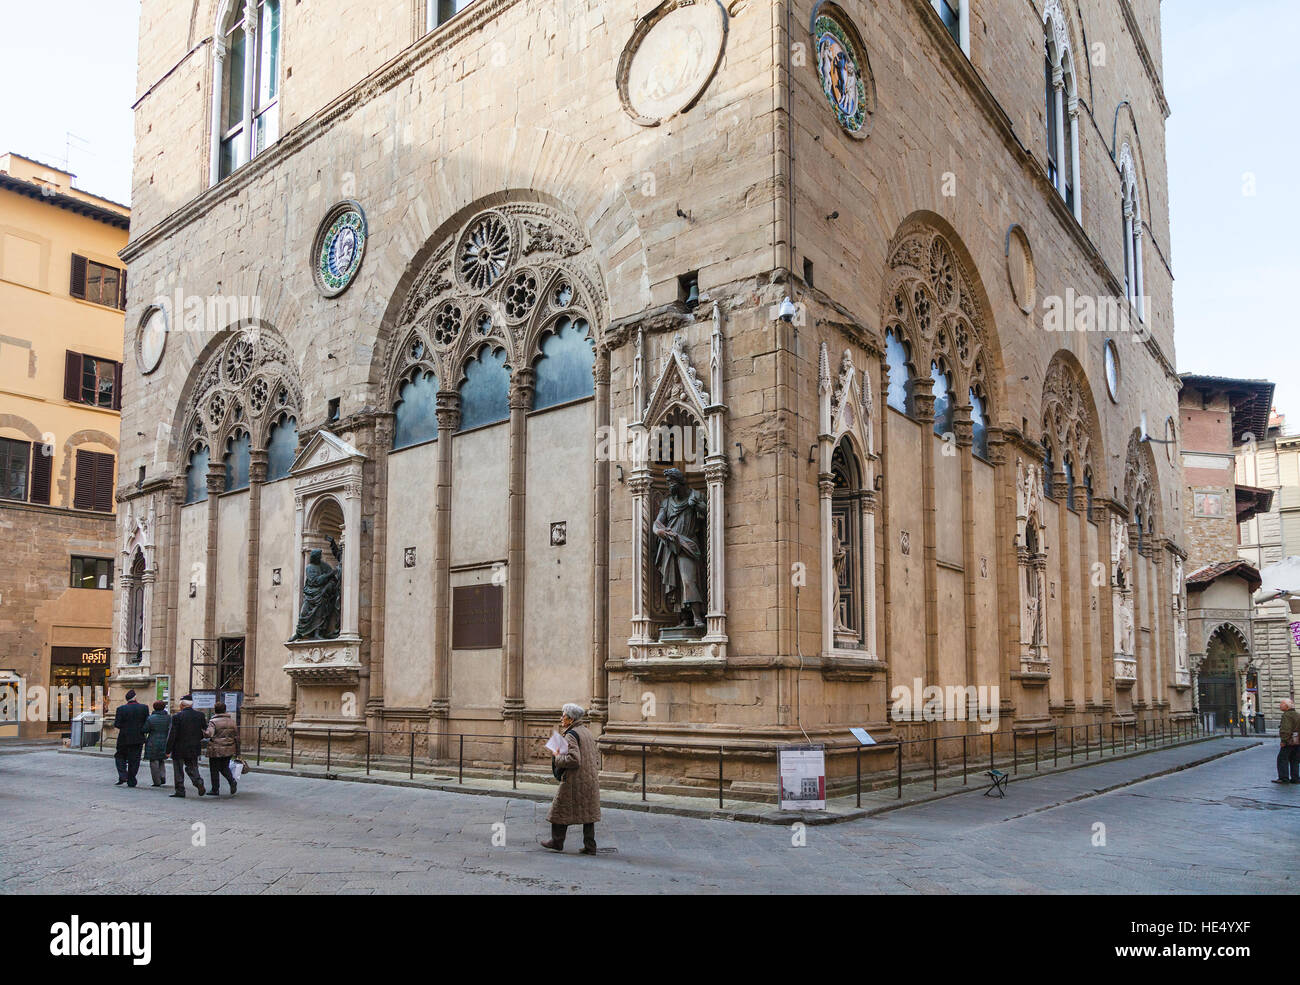 FLORENCE, ITALY - NOVEMBER 4, 2016: people near Orsanmichele church building on Florence city streets. Church was originally built as a grain market i Stock Photo